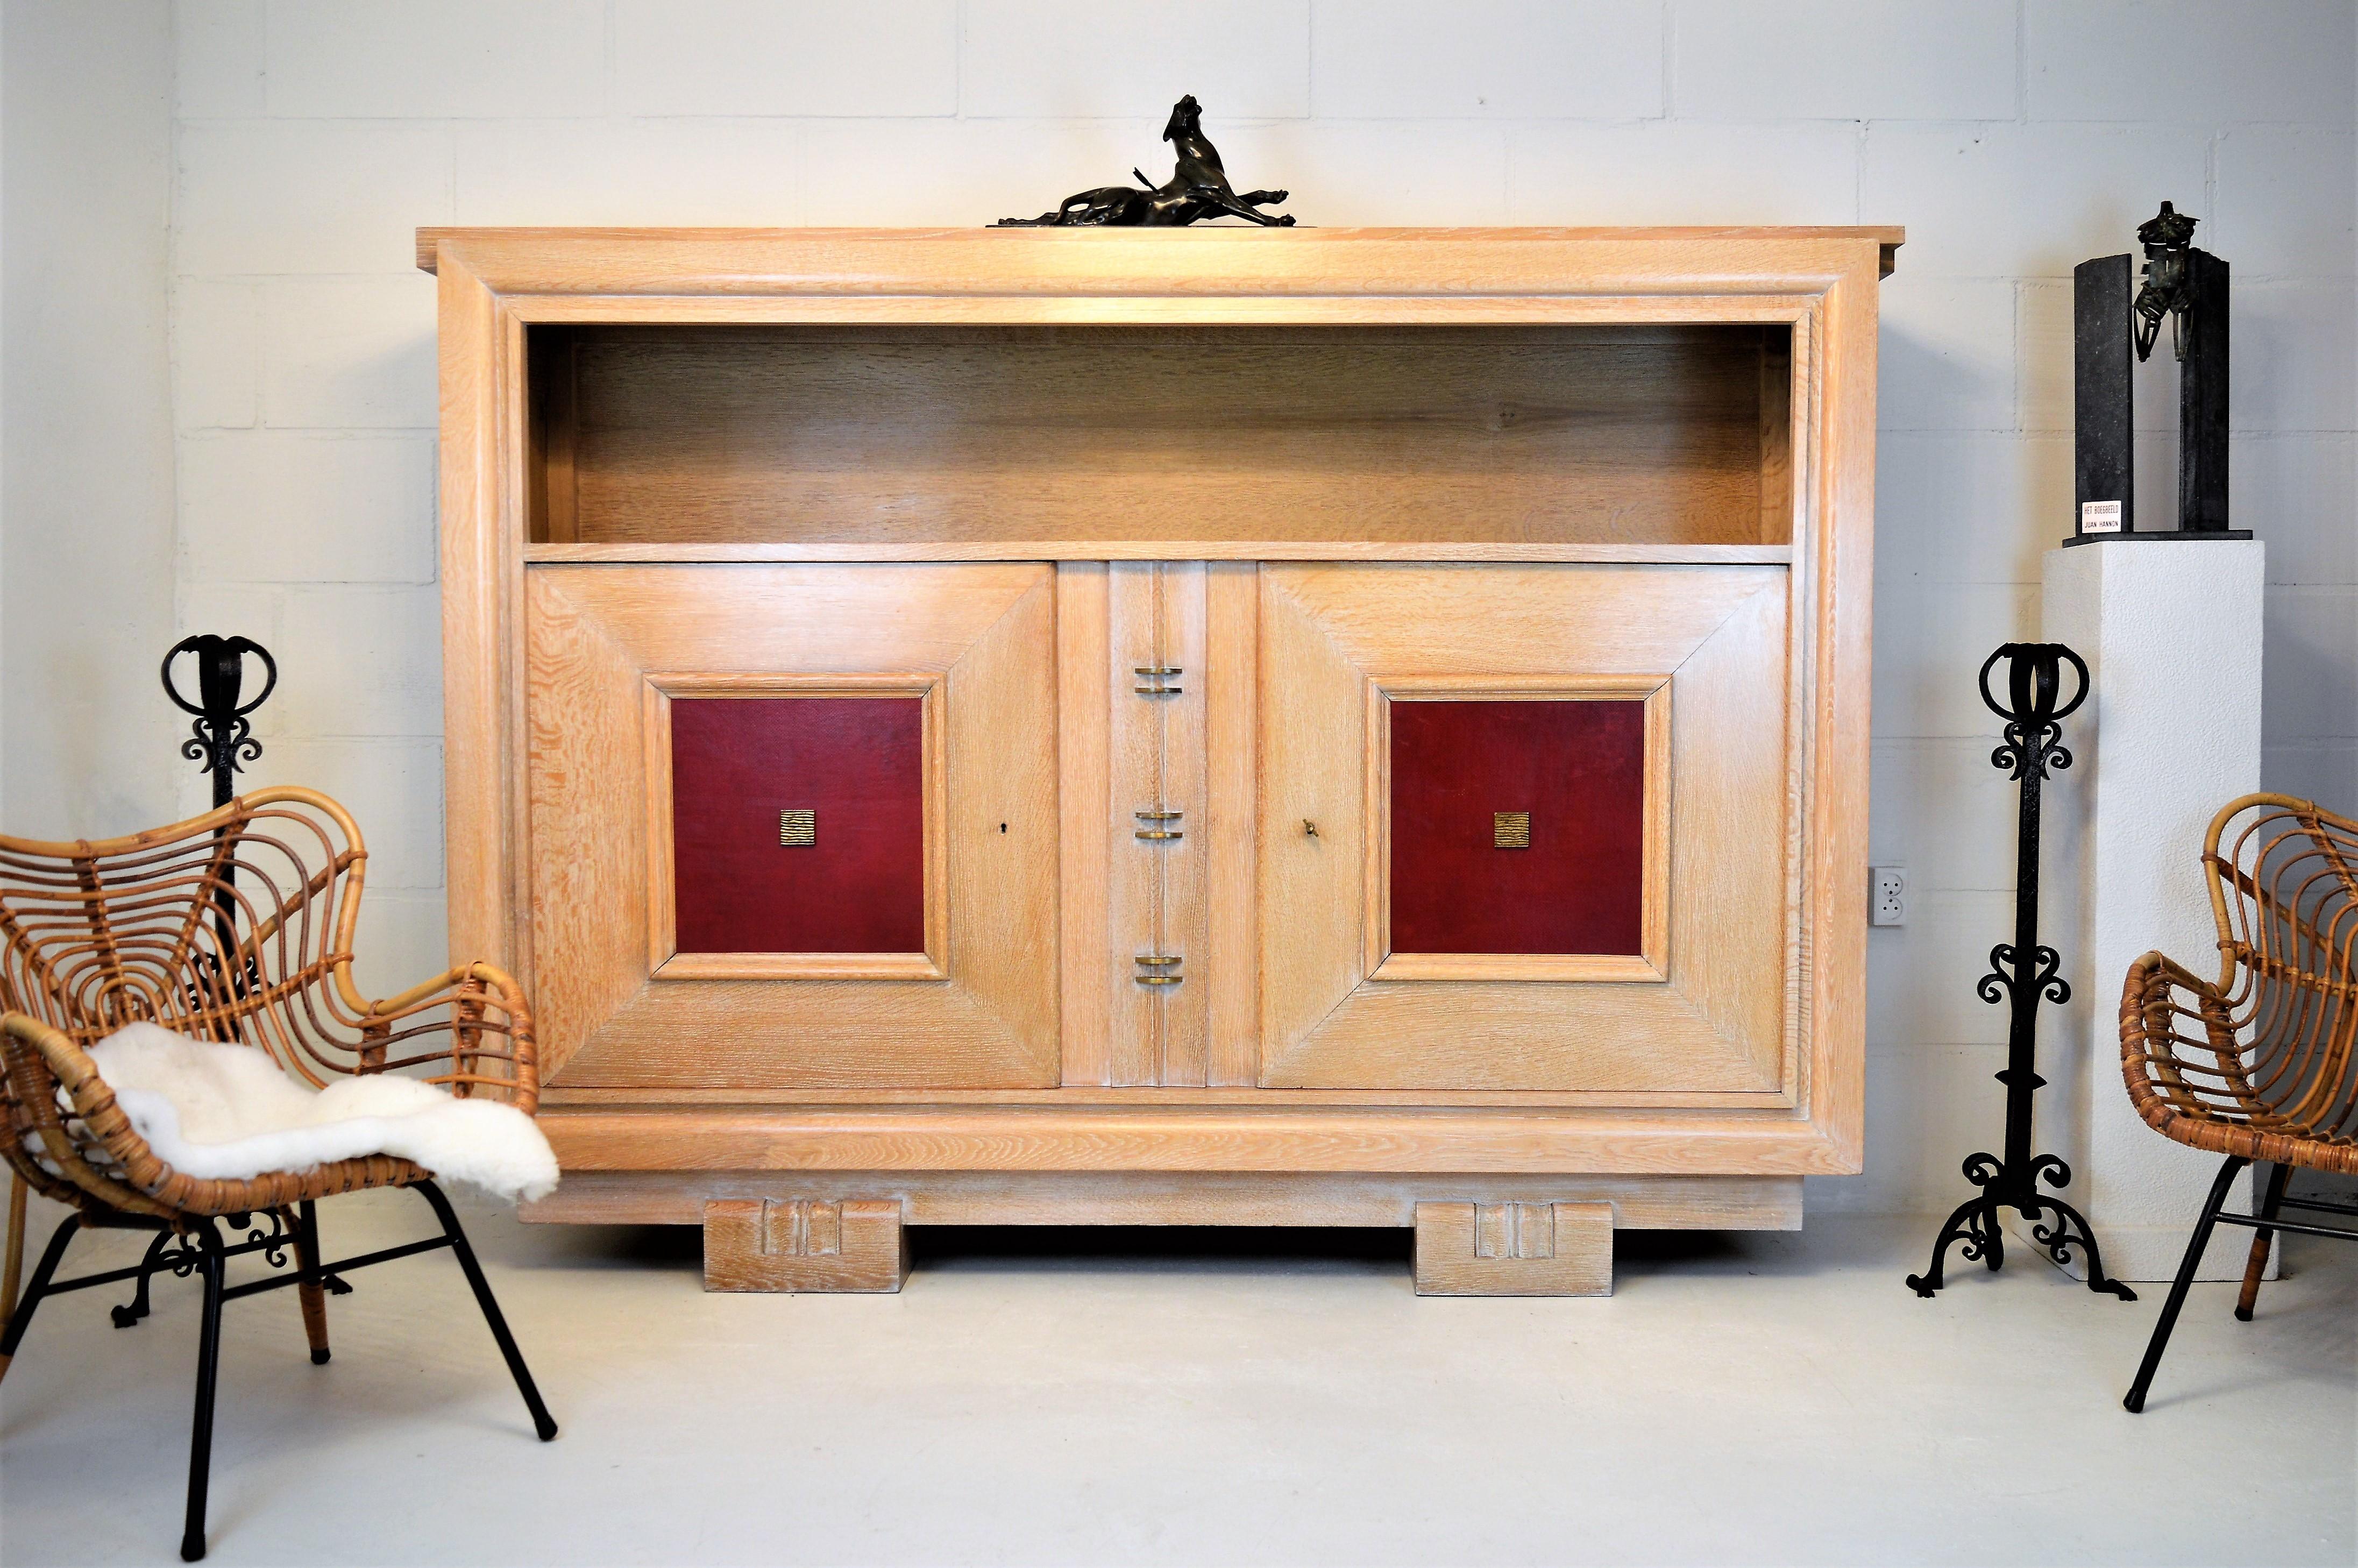 Very luxury version of a Charles Dudouyt cabinet . This cabinet with doorpanels in red leather and stylish applications in bronze, has a secret space in the middle as shown in the pictures. It cannot be opened if the left door is closed.
This